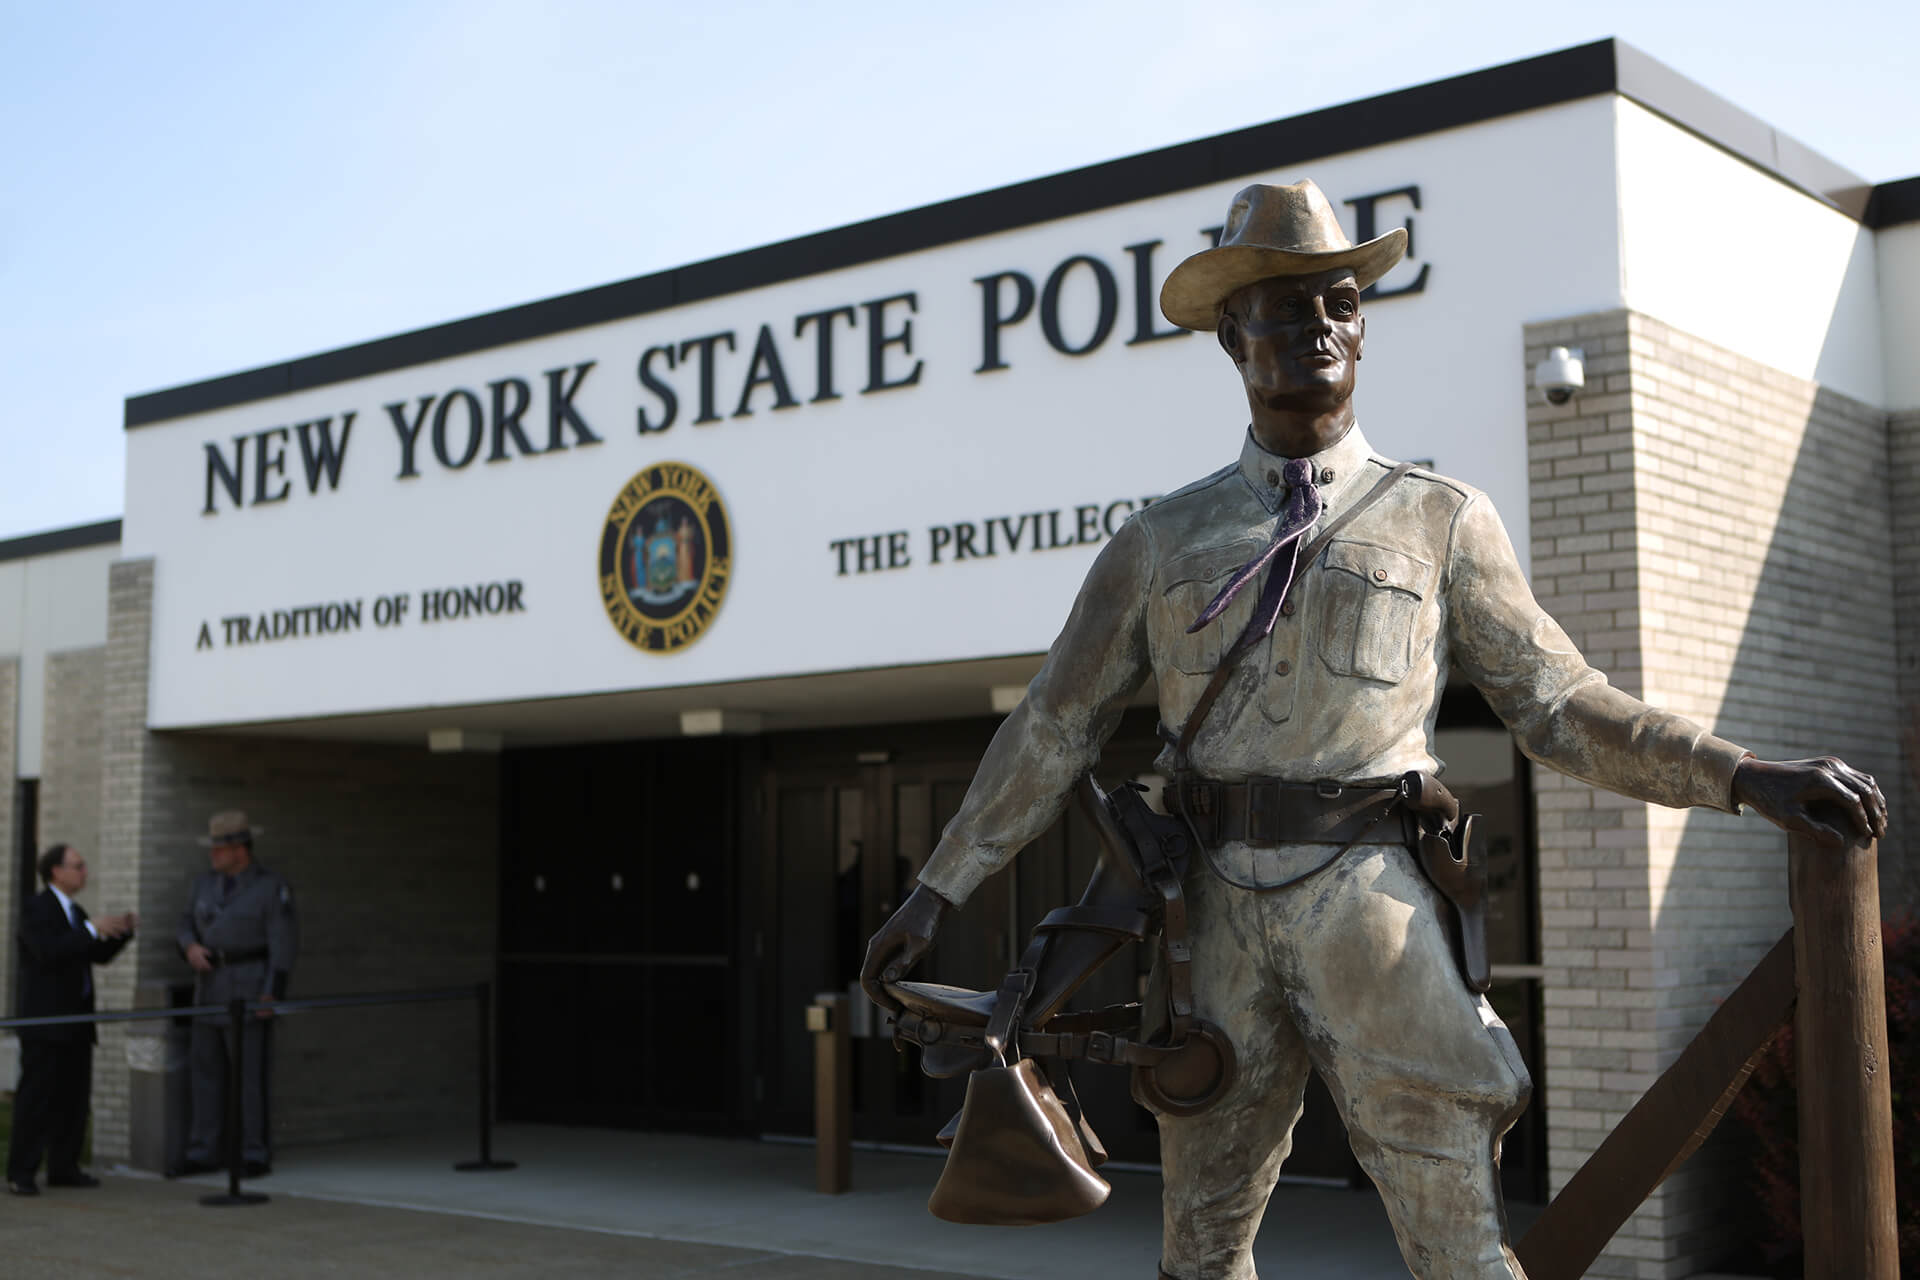 Statue of a Trooper in front of the NY State Police building entry